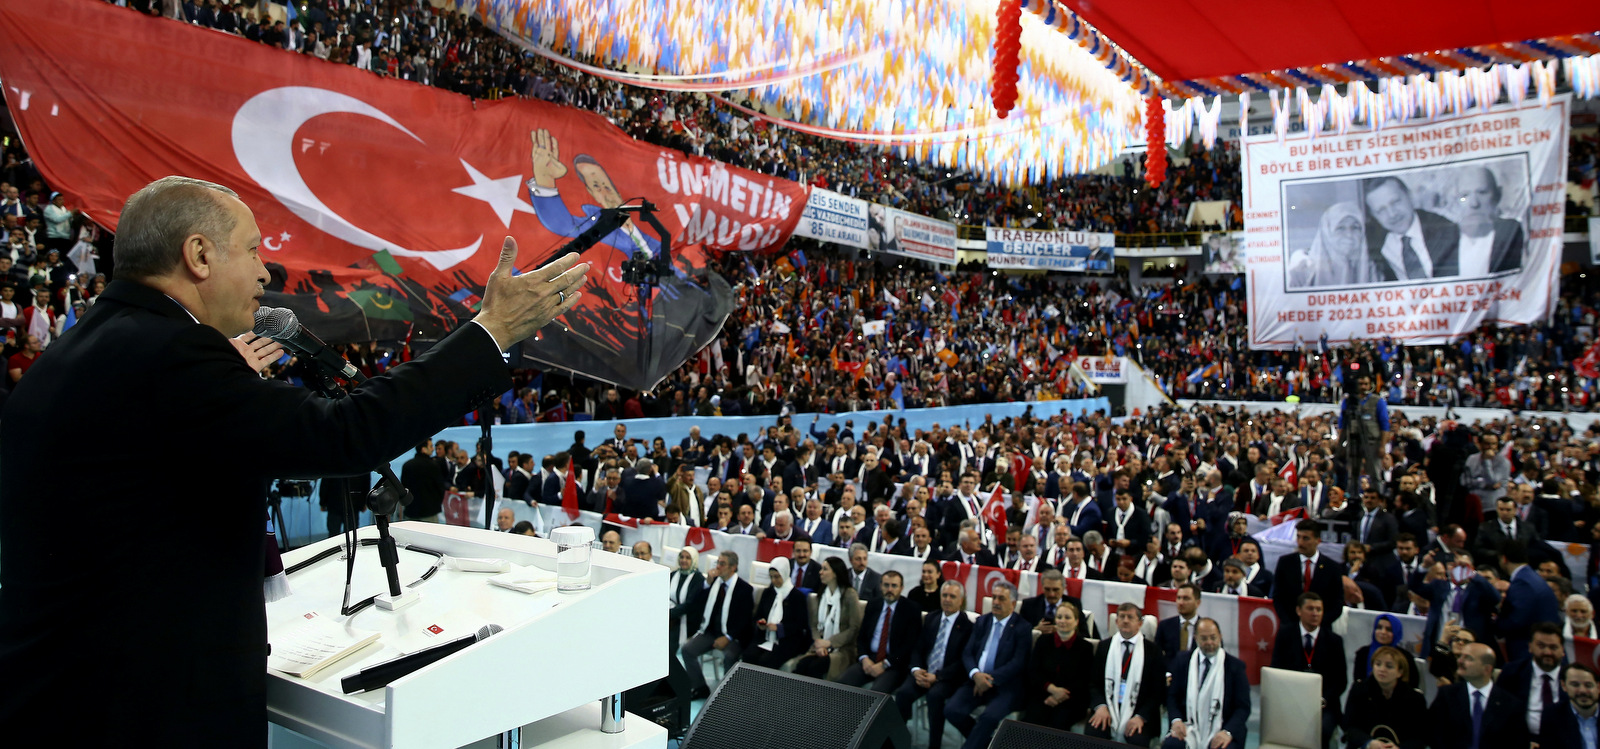 Turkey's President Recep Tayyip Erdogan addresses the members of his ruling party in Trabzon, Turkey, Sunday, March 25, 2018. Erdogan has announced the country is conducting operations in northern Iraq against Kurdish rebels it deems "terrorists." Erdogan on Sunday said "operations" have begun in Sinjar to clear the mountainous area of Kurdistan Workers' Party, or PKK, fighters. An image showing him with his parents Tenzile, left, and Ahmet Erdogan is in the background. (Kayhan Ozer/Pool Photo via AP)